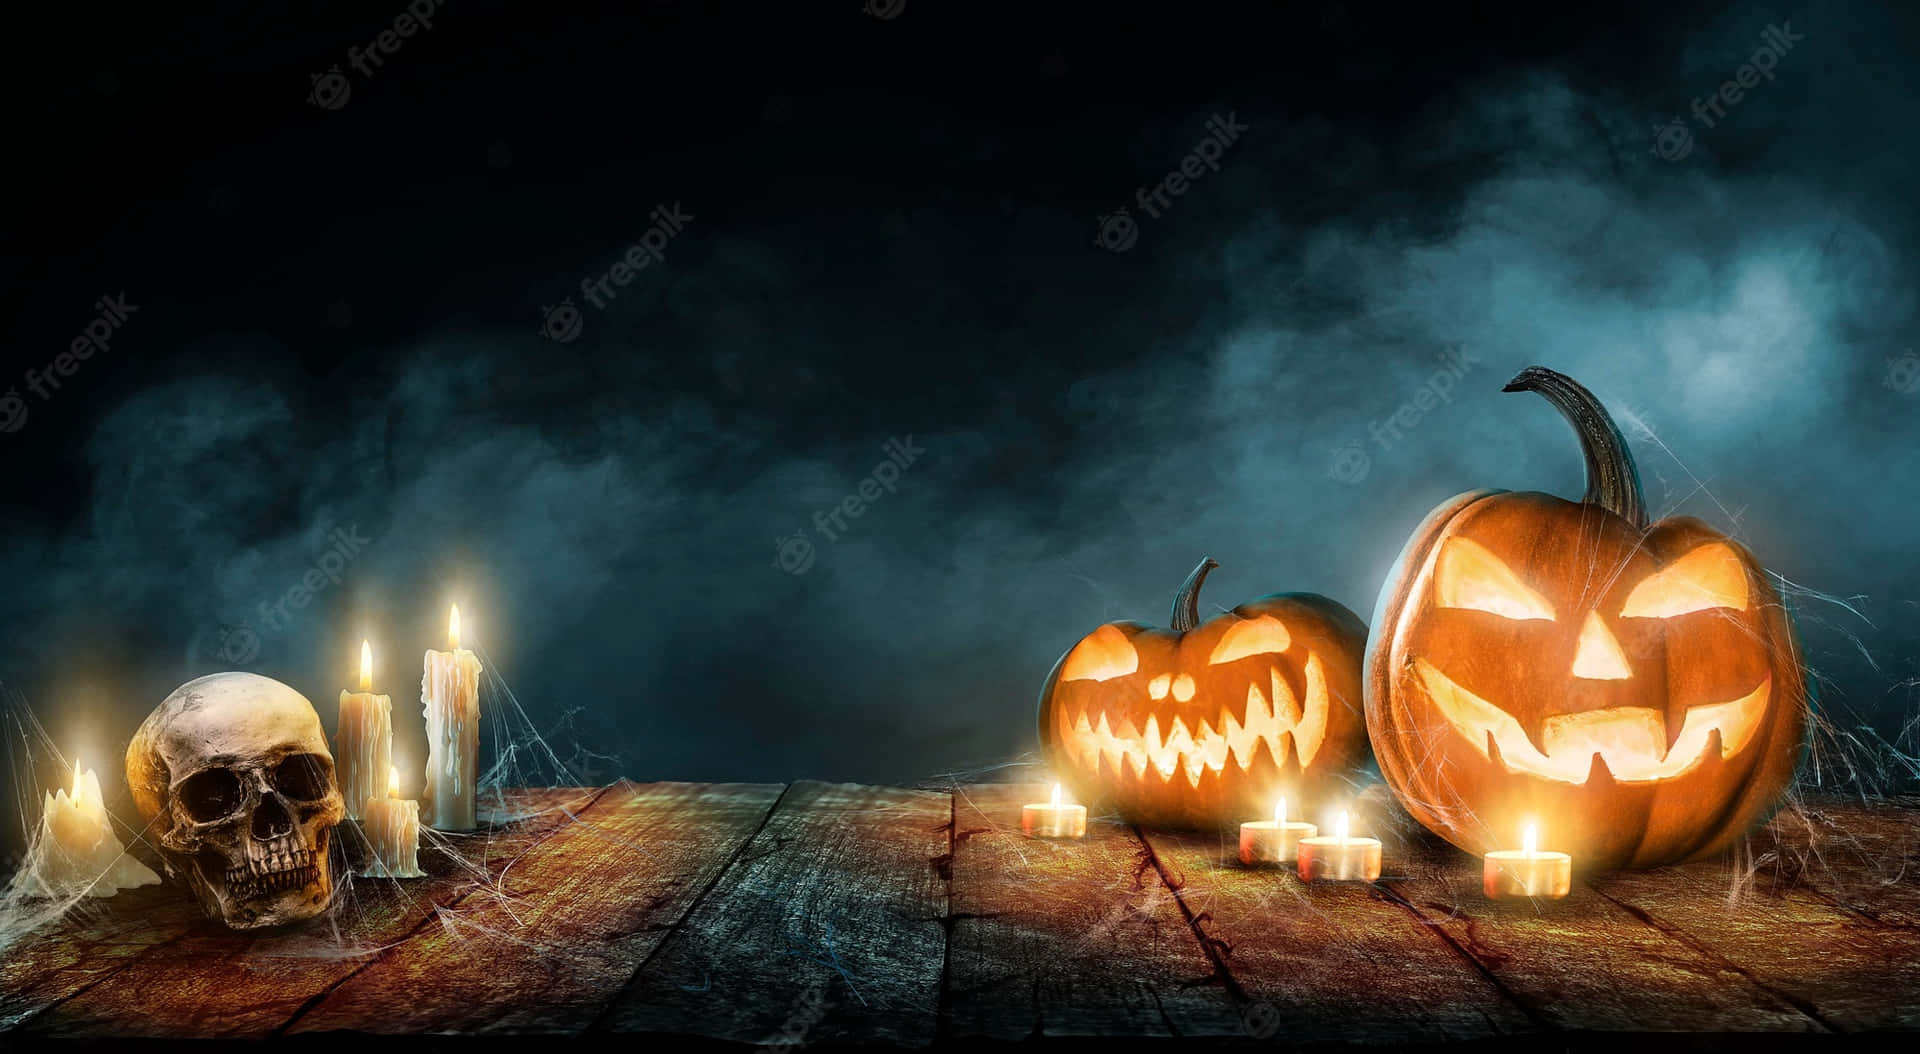 A Spooky and Colorful Neon Halloween Scene Wallpaper